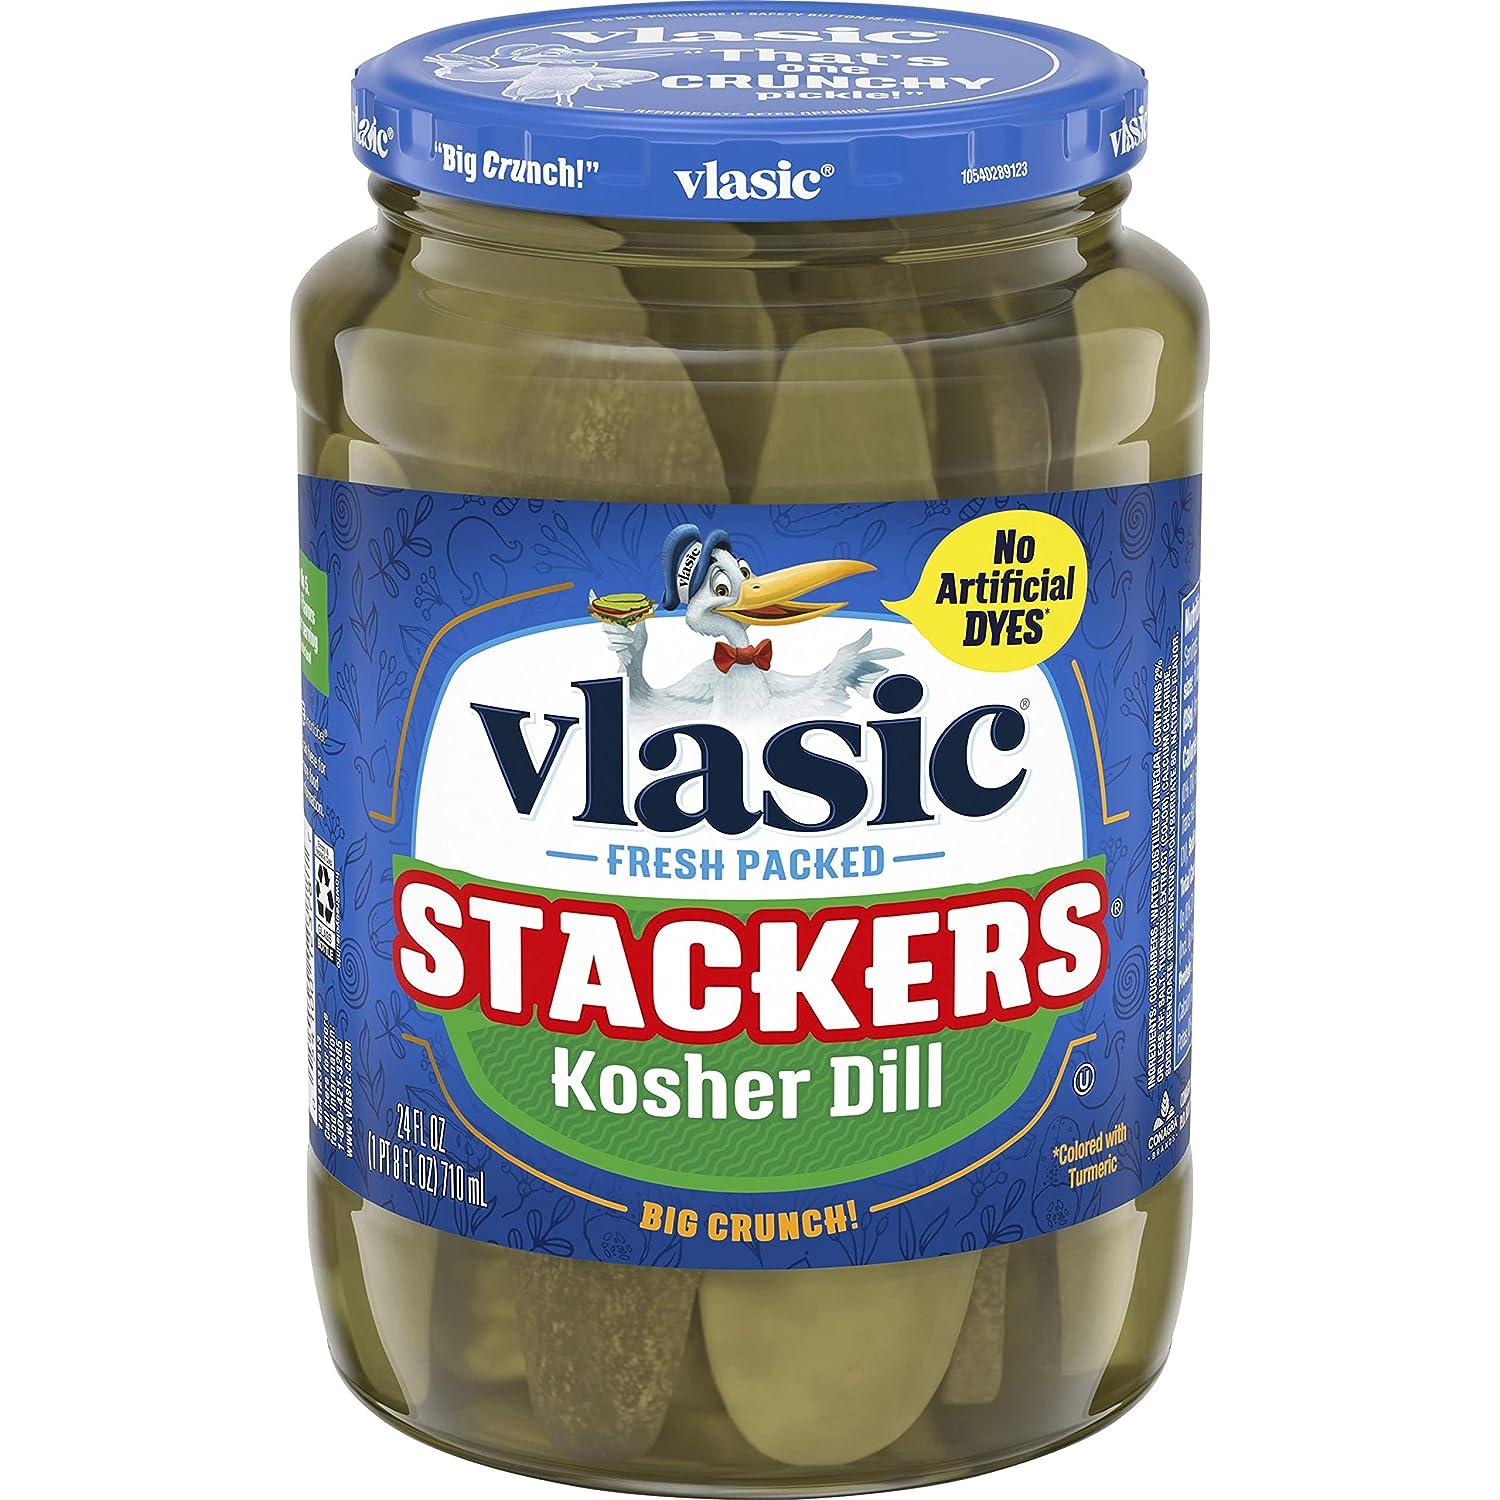 Vlasic Stackers Kosher Dill Pickles for $2.63 Shipped